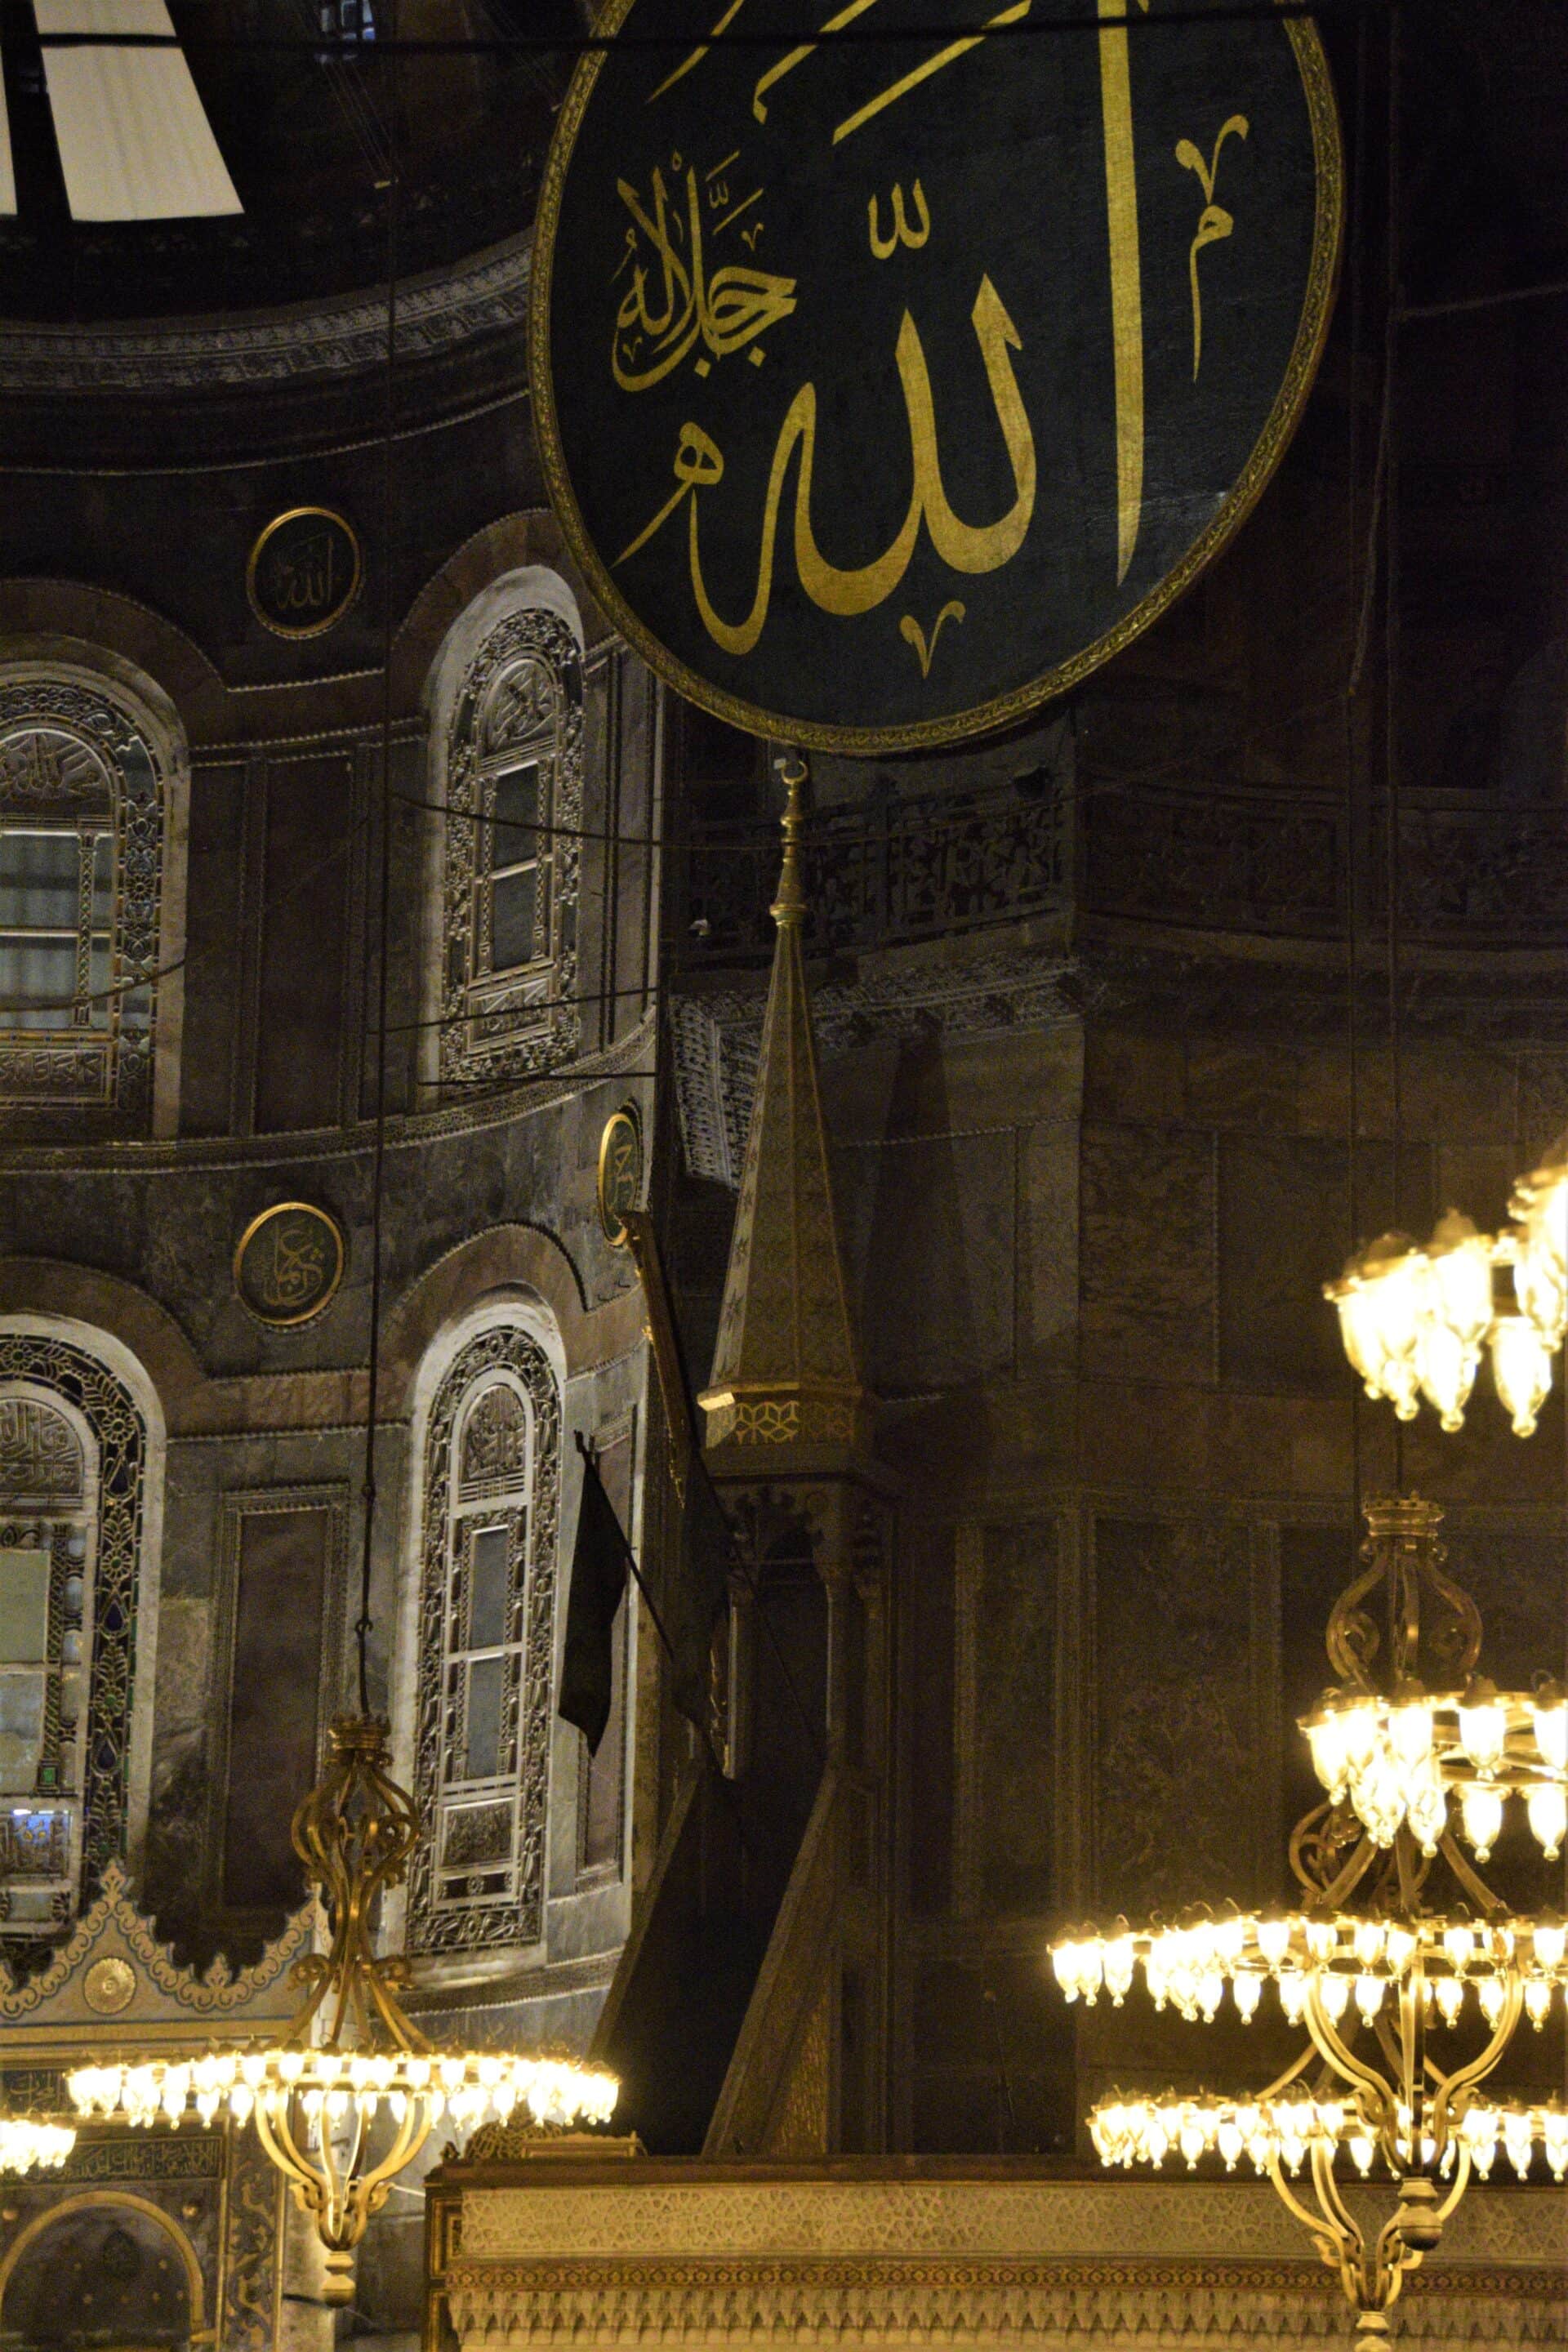 the minbar surrounded by chandeliers inside the Hagia Sophia